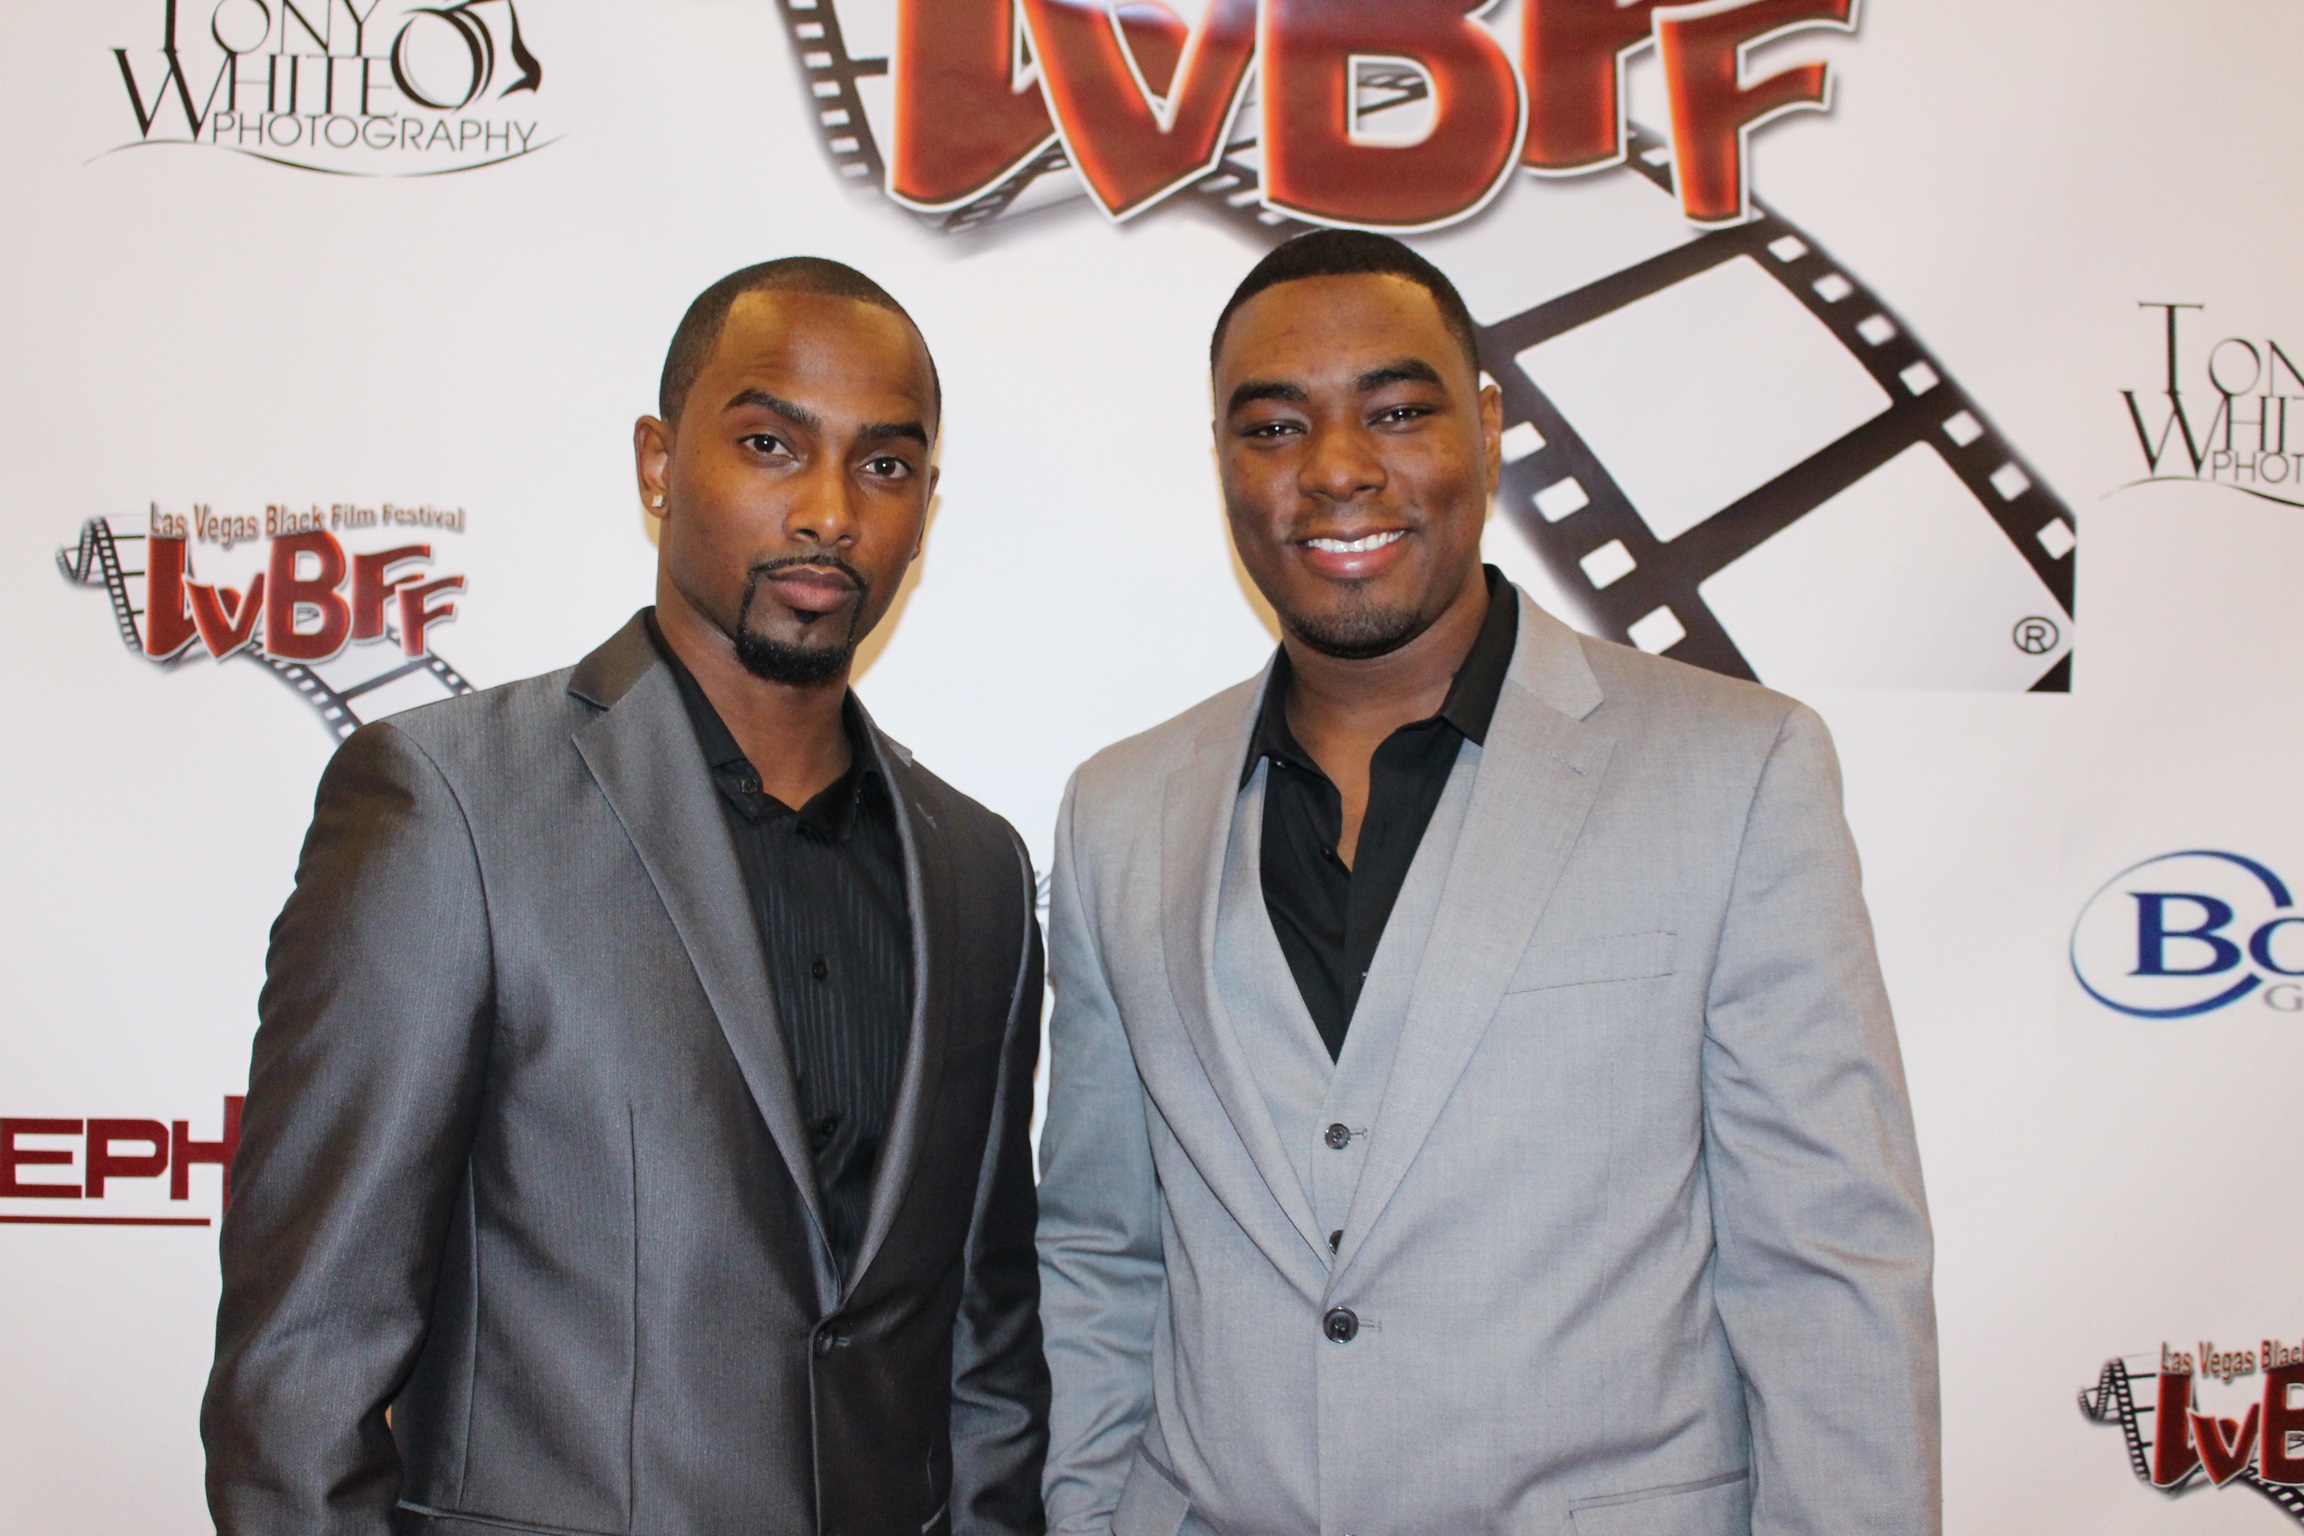 Markiss McFadden and Byron Smith at the Las Vegas Black Film Festival.